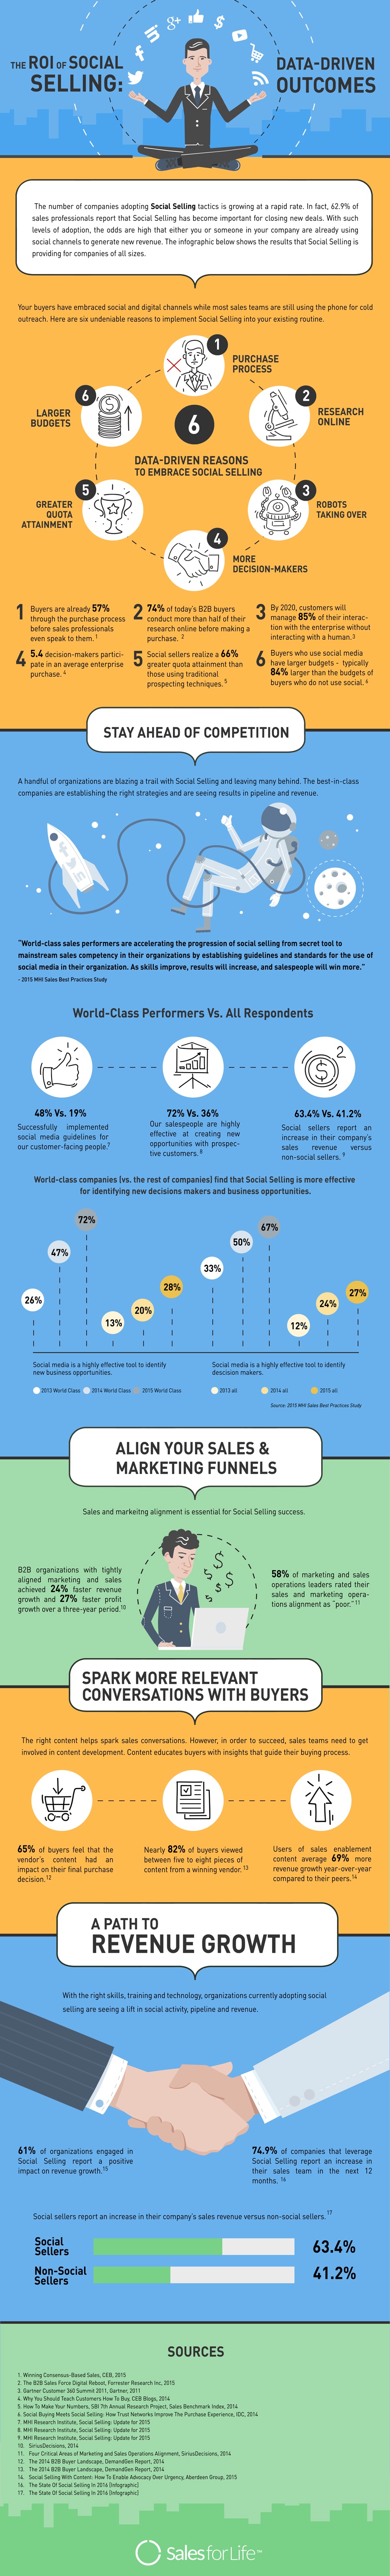 social-selling-roi-infographic